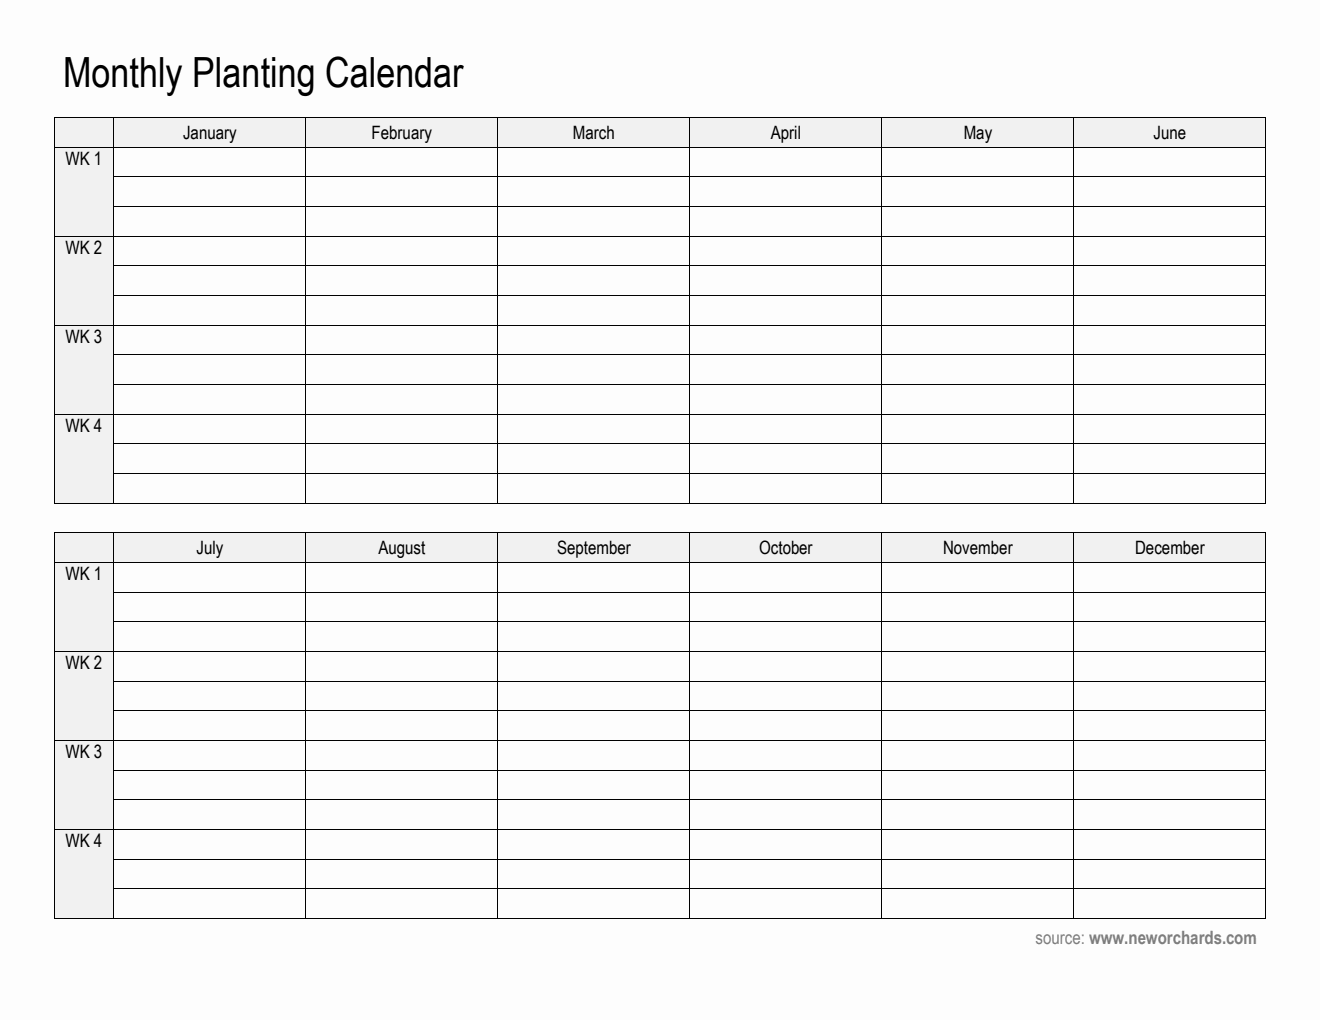  Monthly Planting Calendar in Word